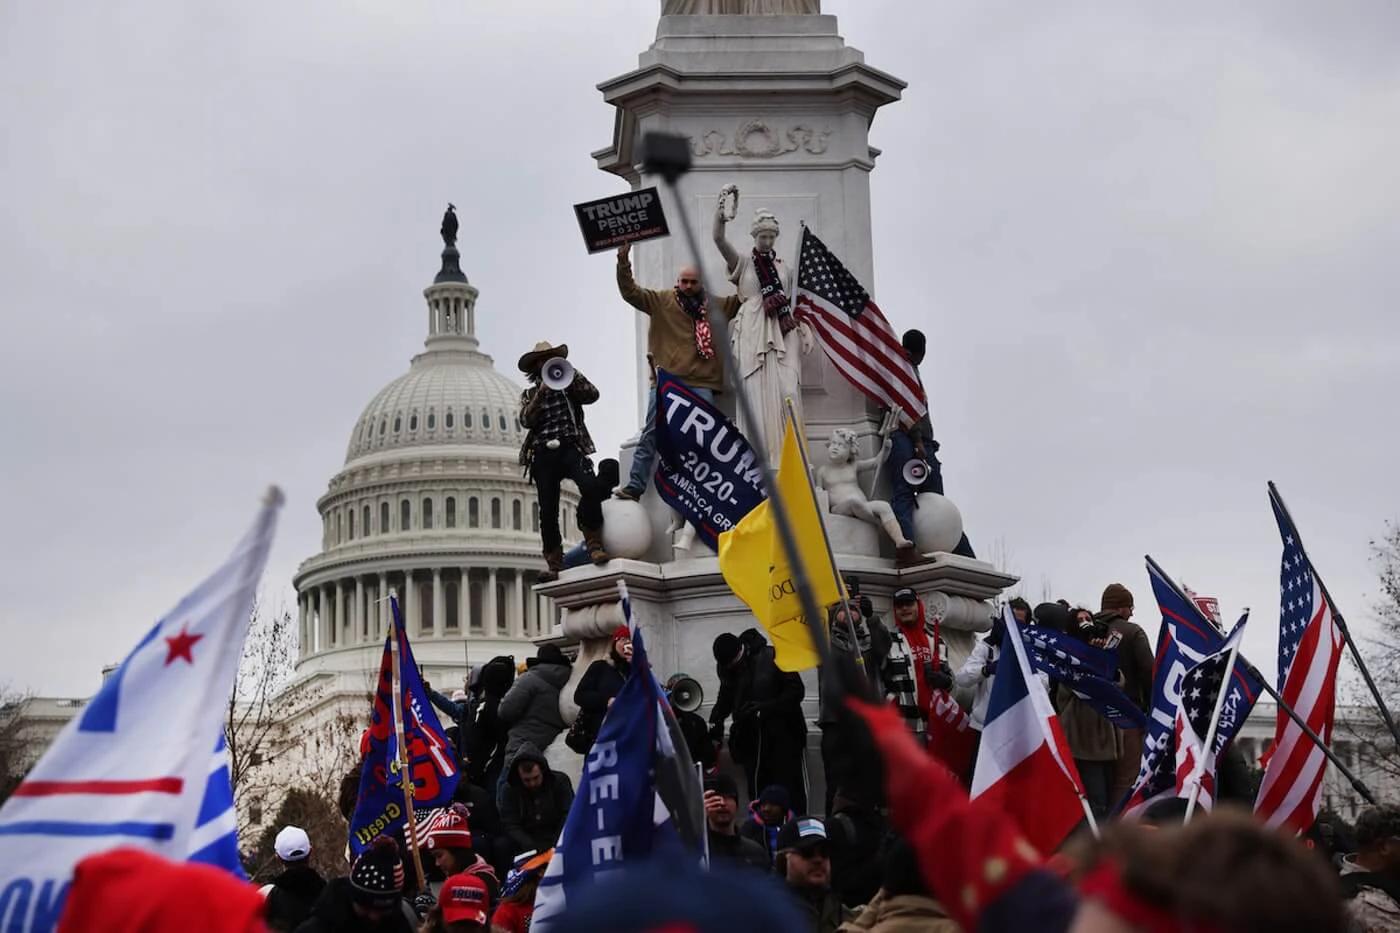 Trump supporters gathered in the nation's capital to protest the ratification of President-elect Joe Biden's Electoral College victory over President Donald Trump in the 2020 election. The demonstration turned violent and deadly. (Getty Images Photo/ Spencer Platt)